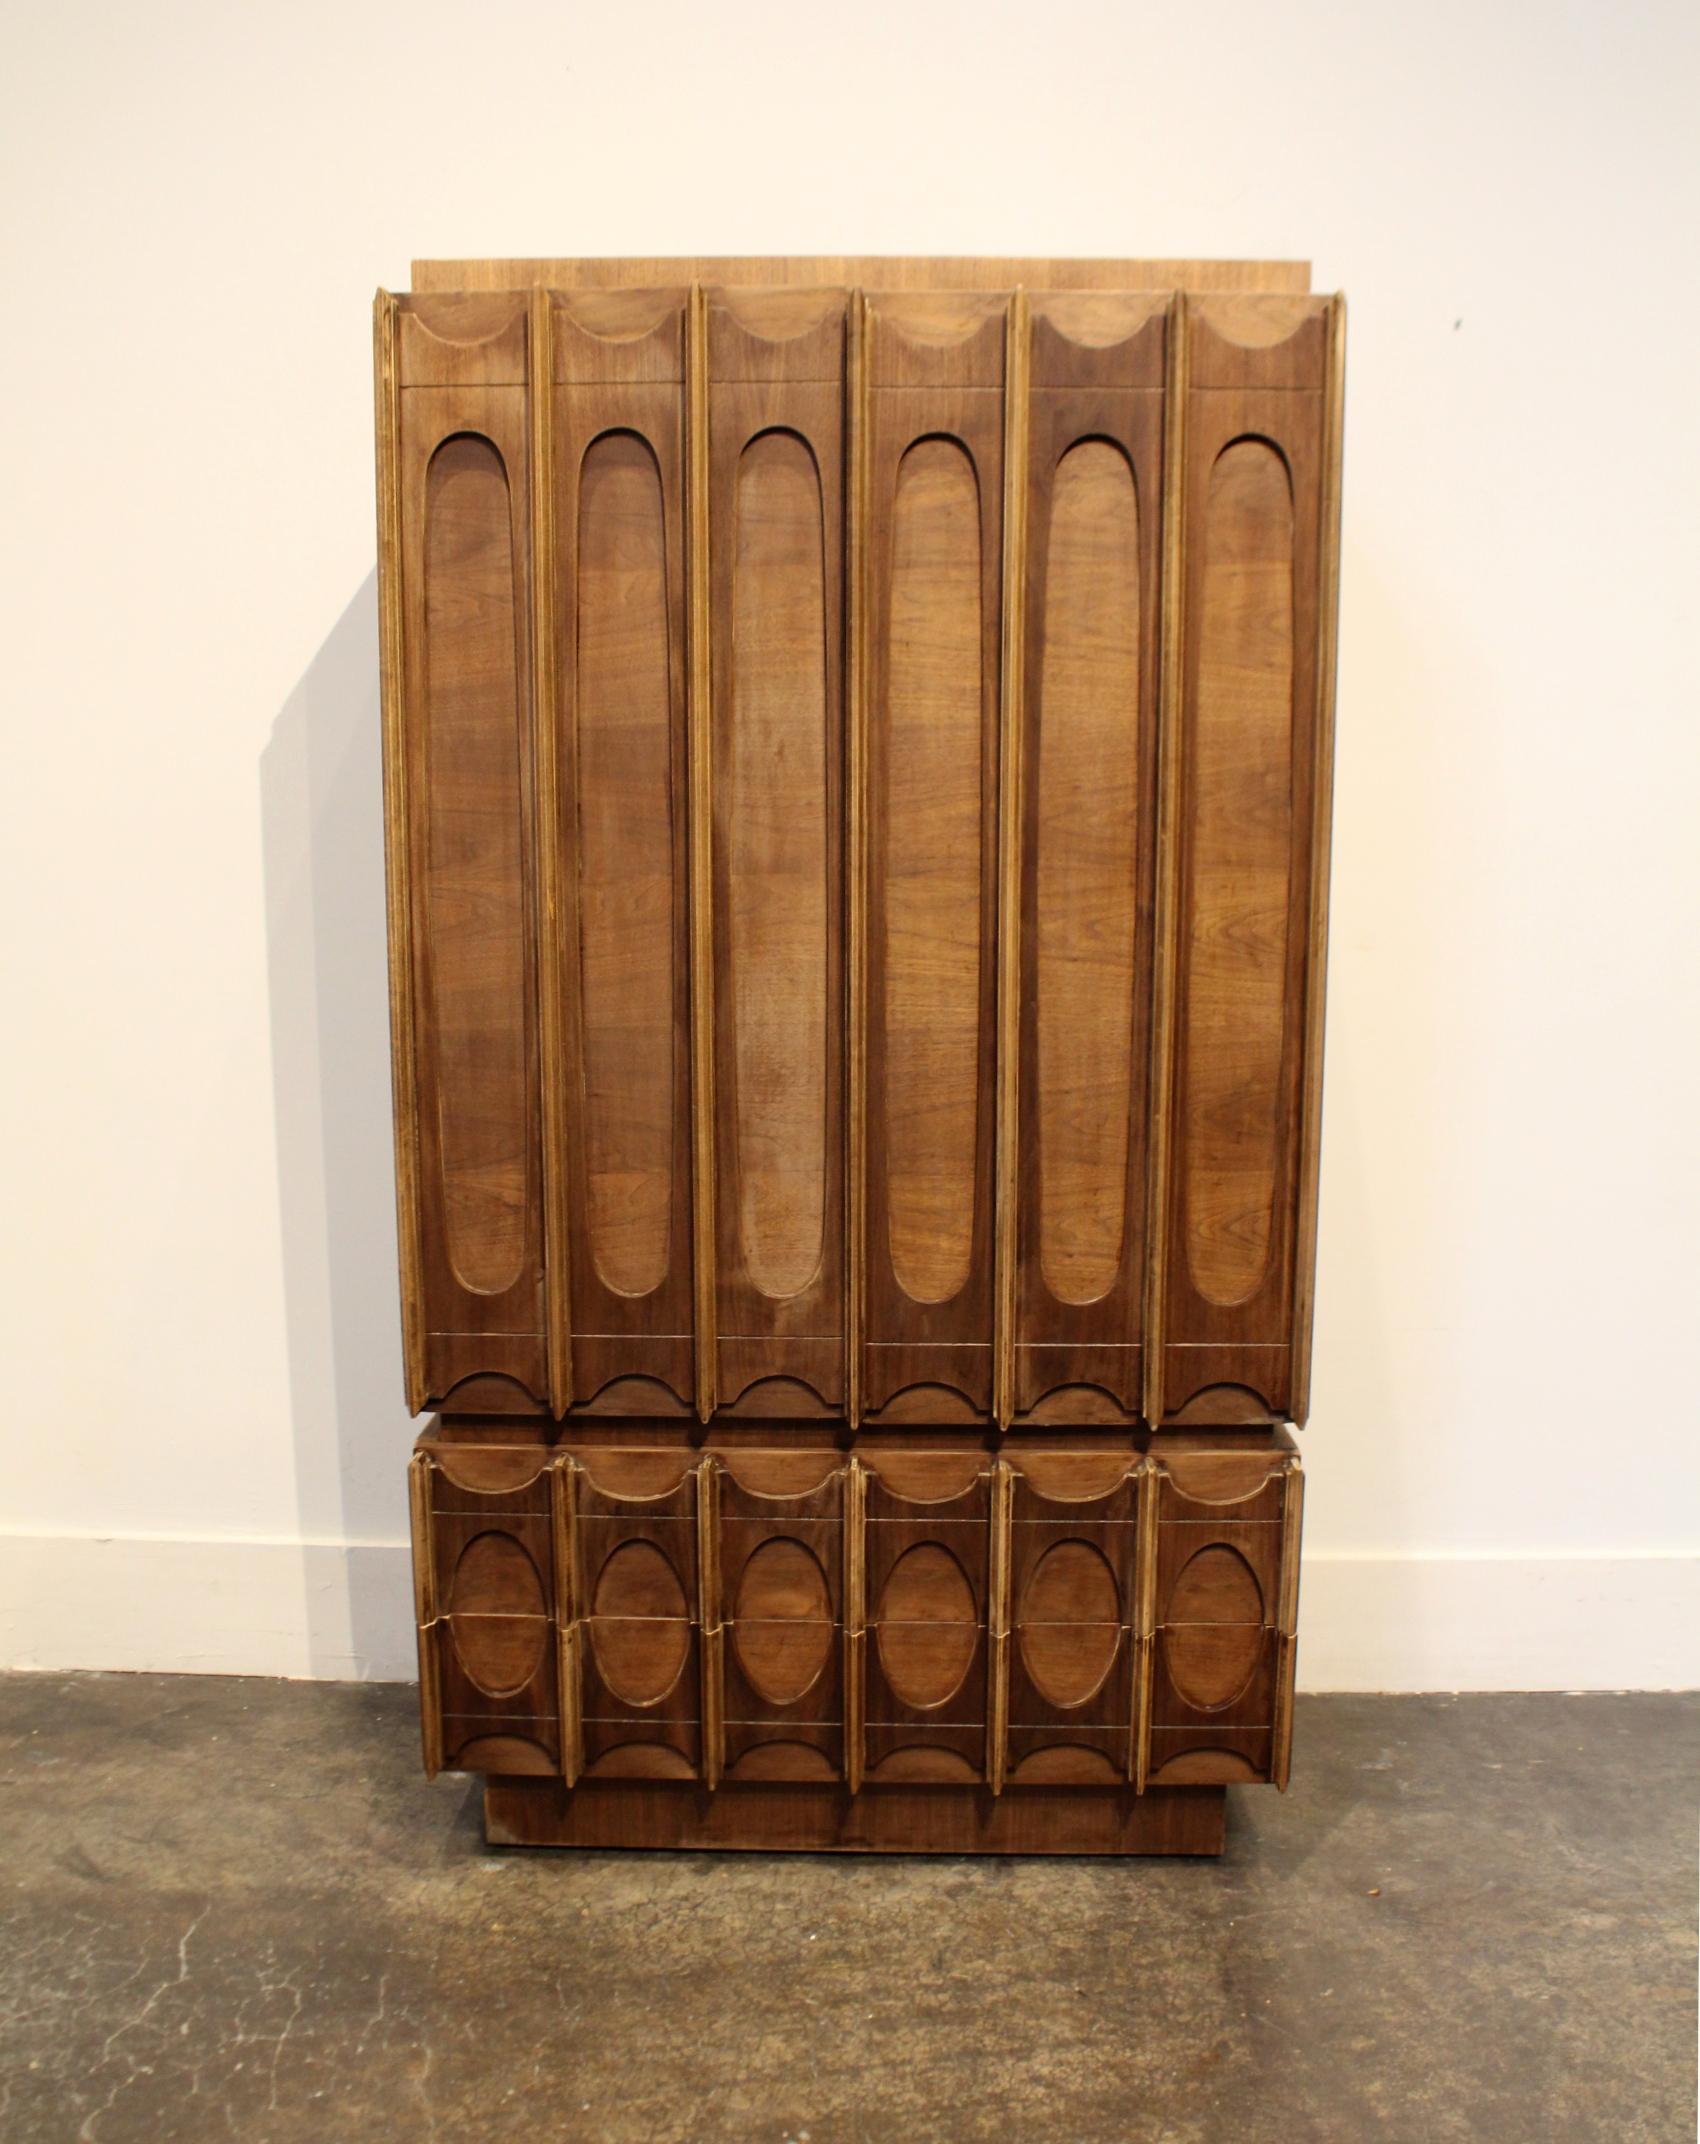 One of a kind Brutalist 1970s two-piece wardrobe; stripped down to its natural walnut wood and refinished with a flat protective finish. Strong sculptural, Brasilia-style front and stunning natural patina. Six feet in height with spacious drawer and